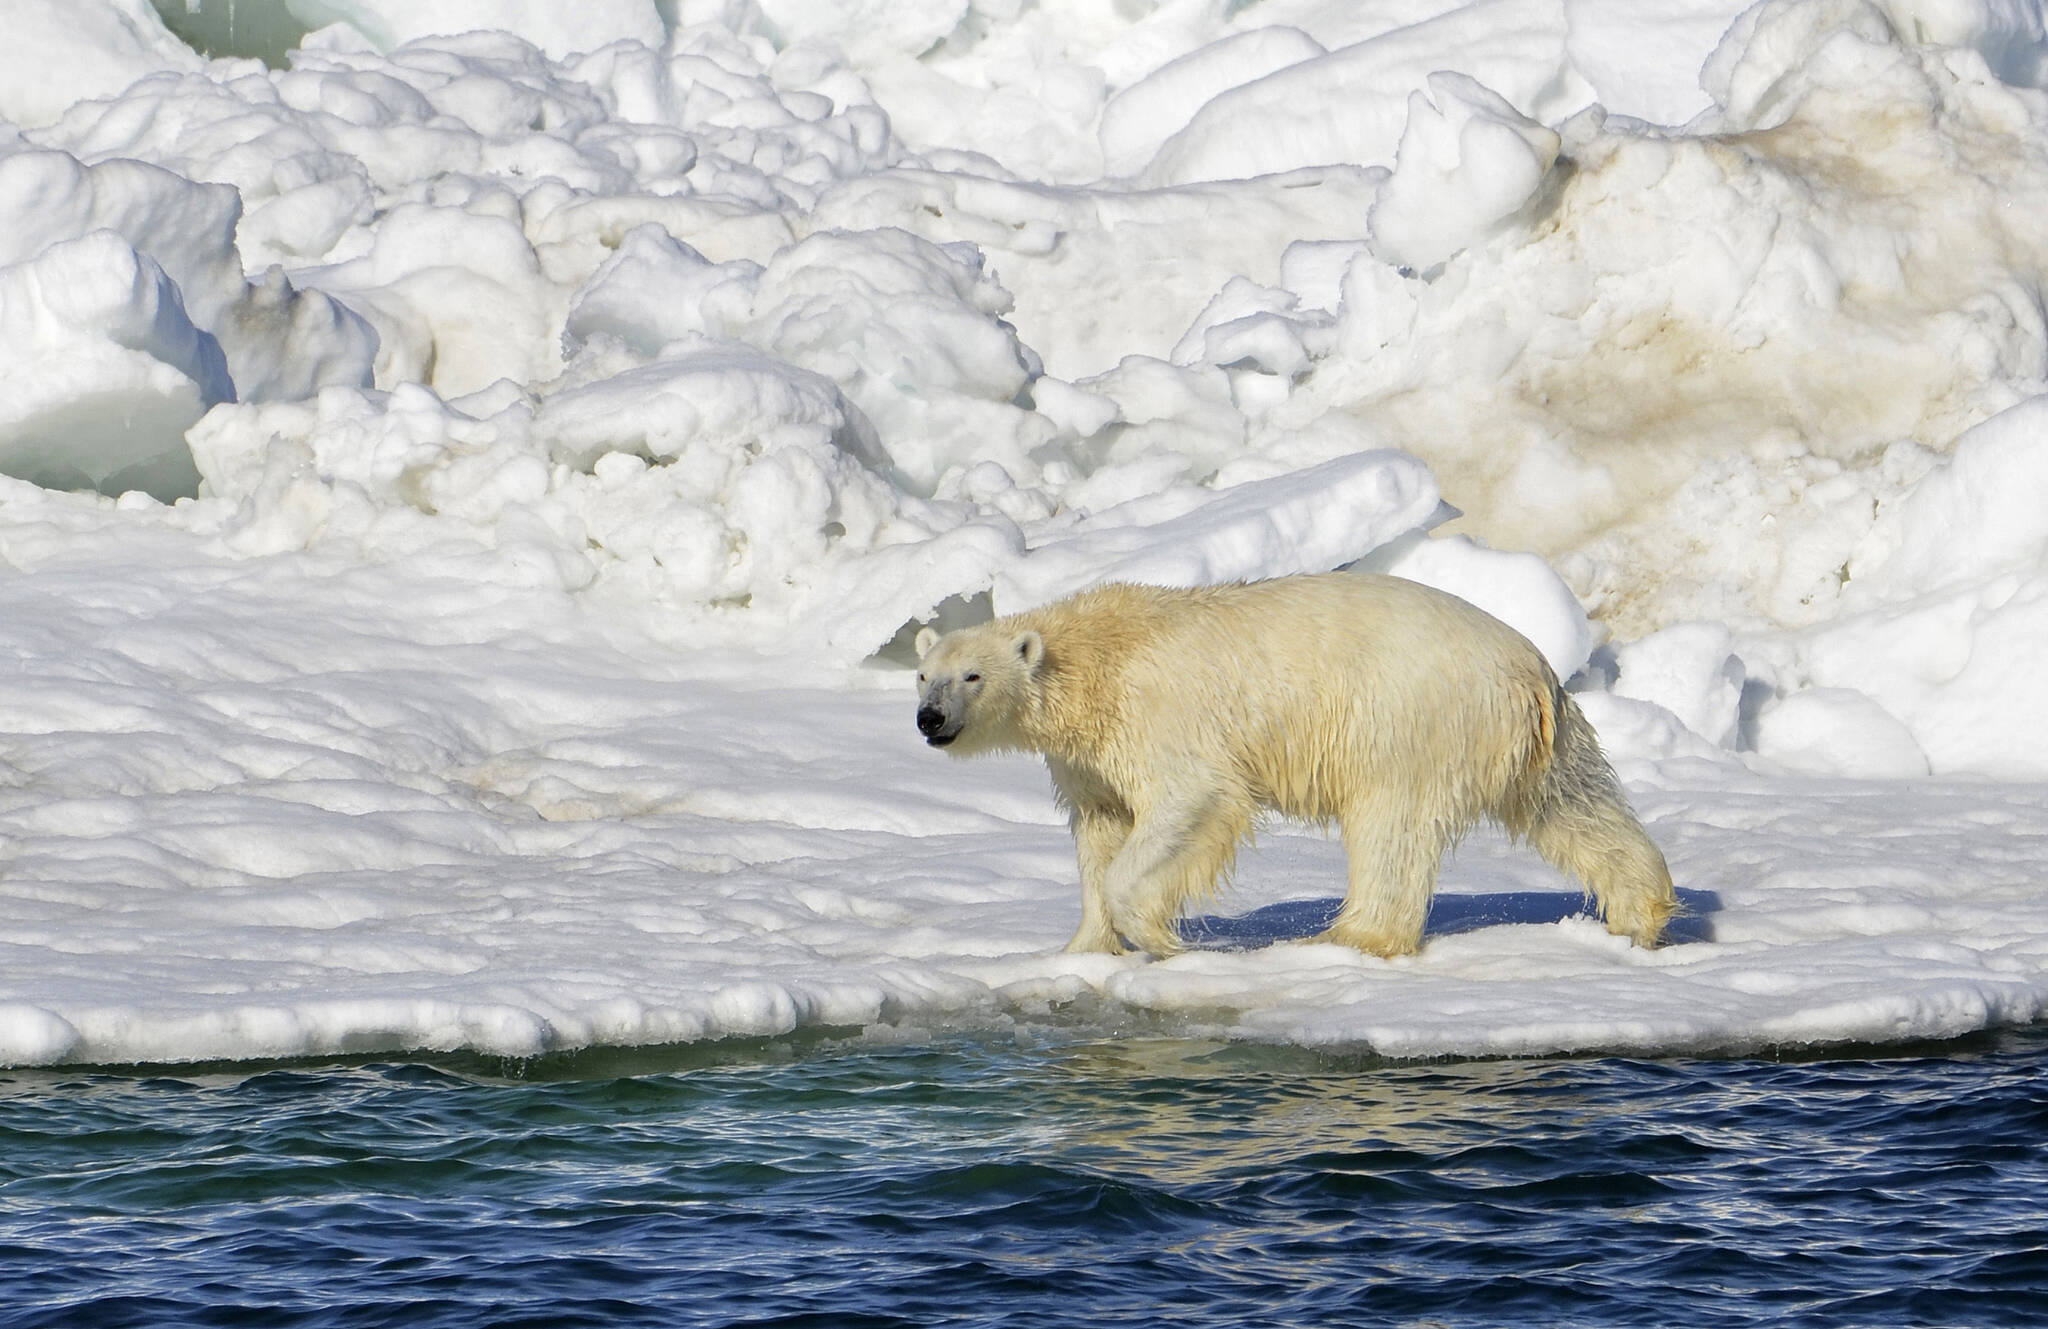 In this June 15, 2014, file photo released by the U.S. Geological Survey, a polar bear dries off after taking a swim in the Chukchi Sea in Alaska. A polar bear has attacked and killed two people in a remote village in western Alaska, according to state troopers who said they received the report of the attack on Tuesday, Jan 17, 2023, in Wales, on the western tip of the Seward Peninsula. (Brian Battaile/U.S. Geological Survey via AP, File)